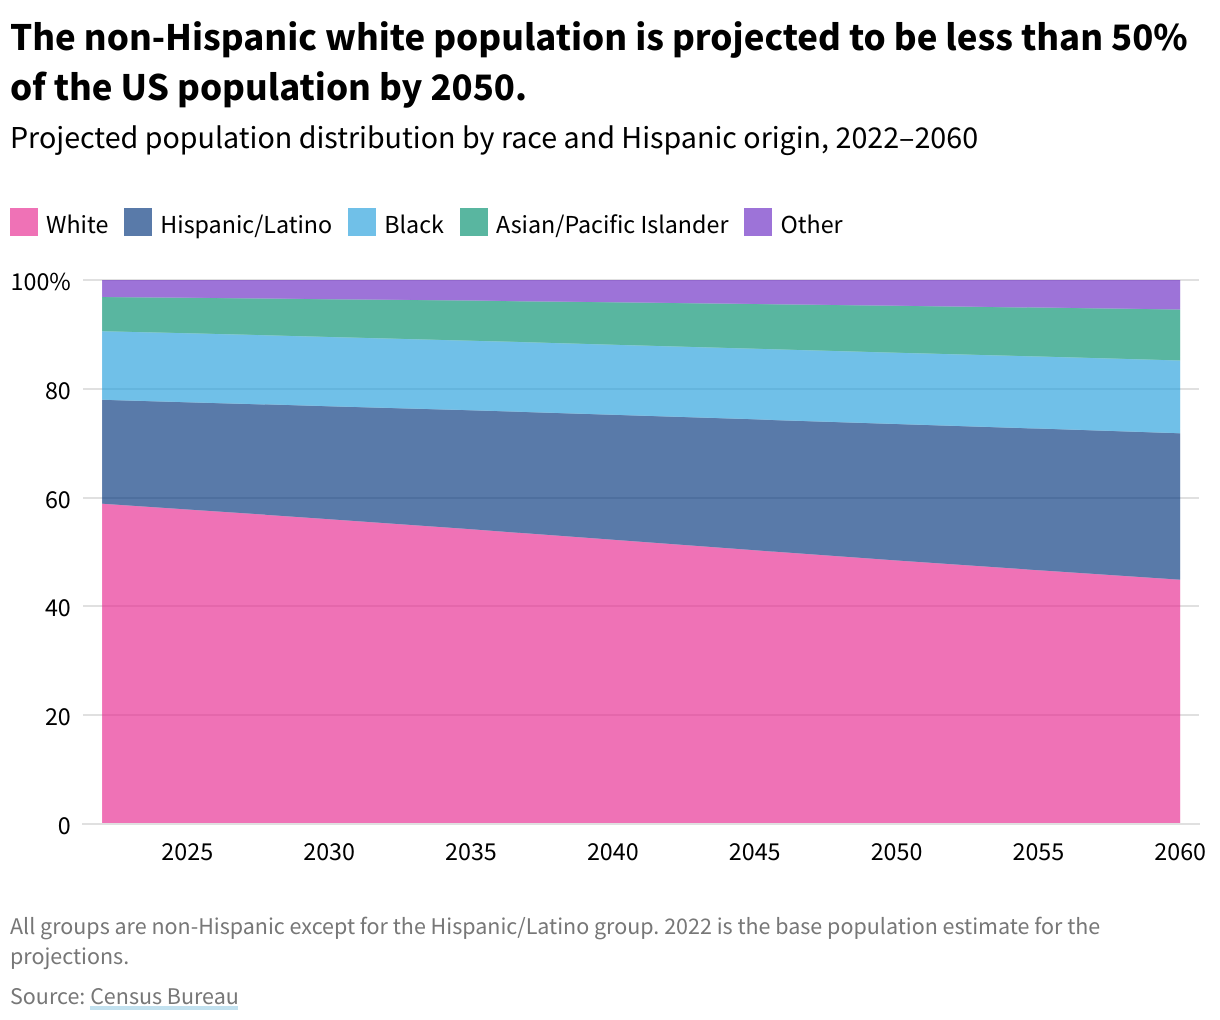 Area chart showing the projected population distribution by race and ethnicity in the US from 2022 to 2060, with the white category shrinking over time.